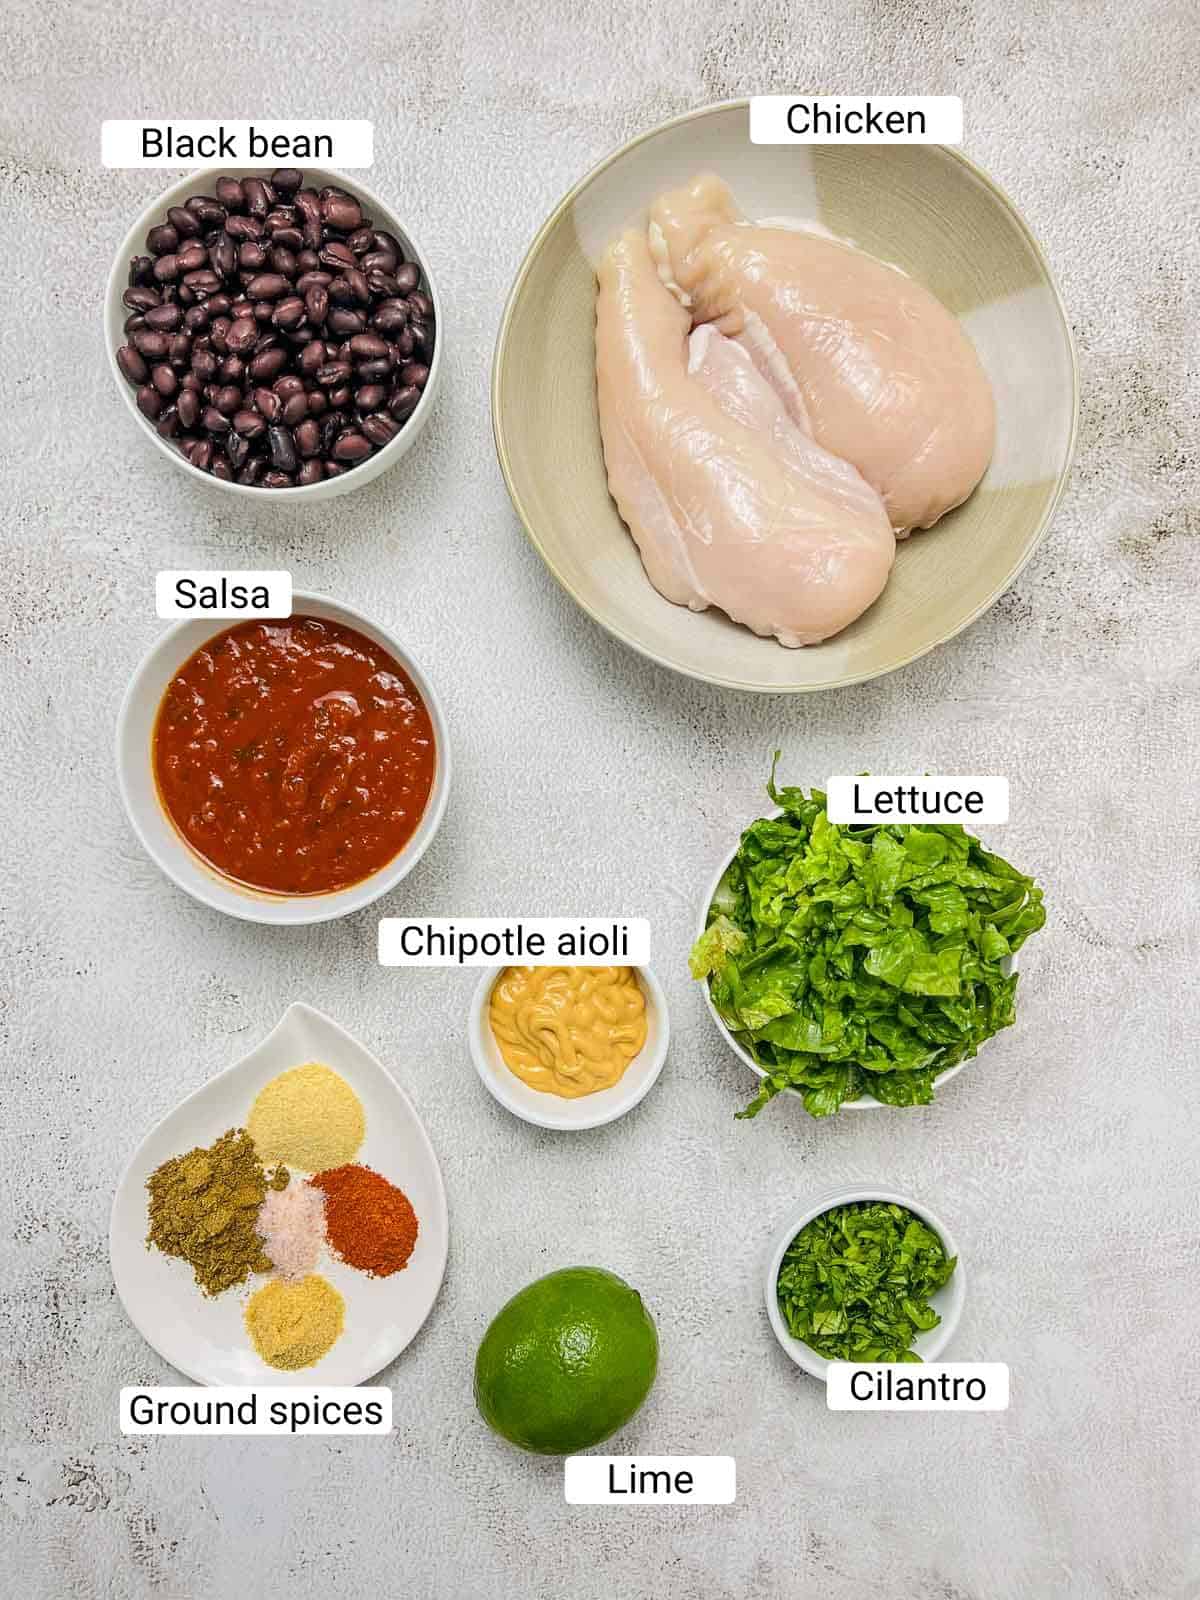 Ingredients to make chicken burrito bowl on a white surface.